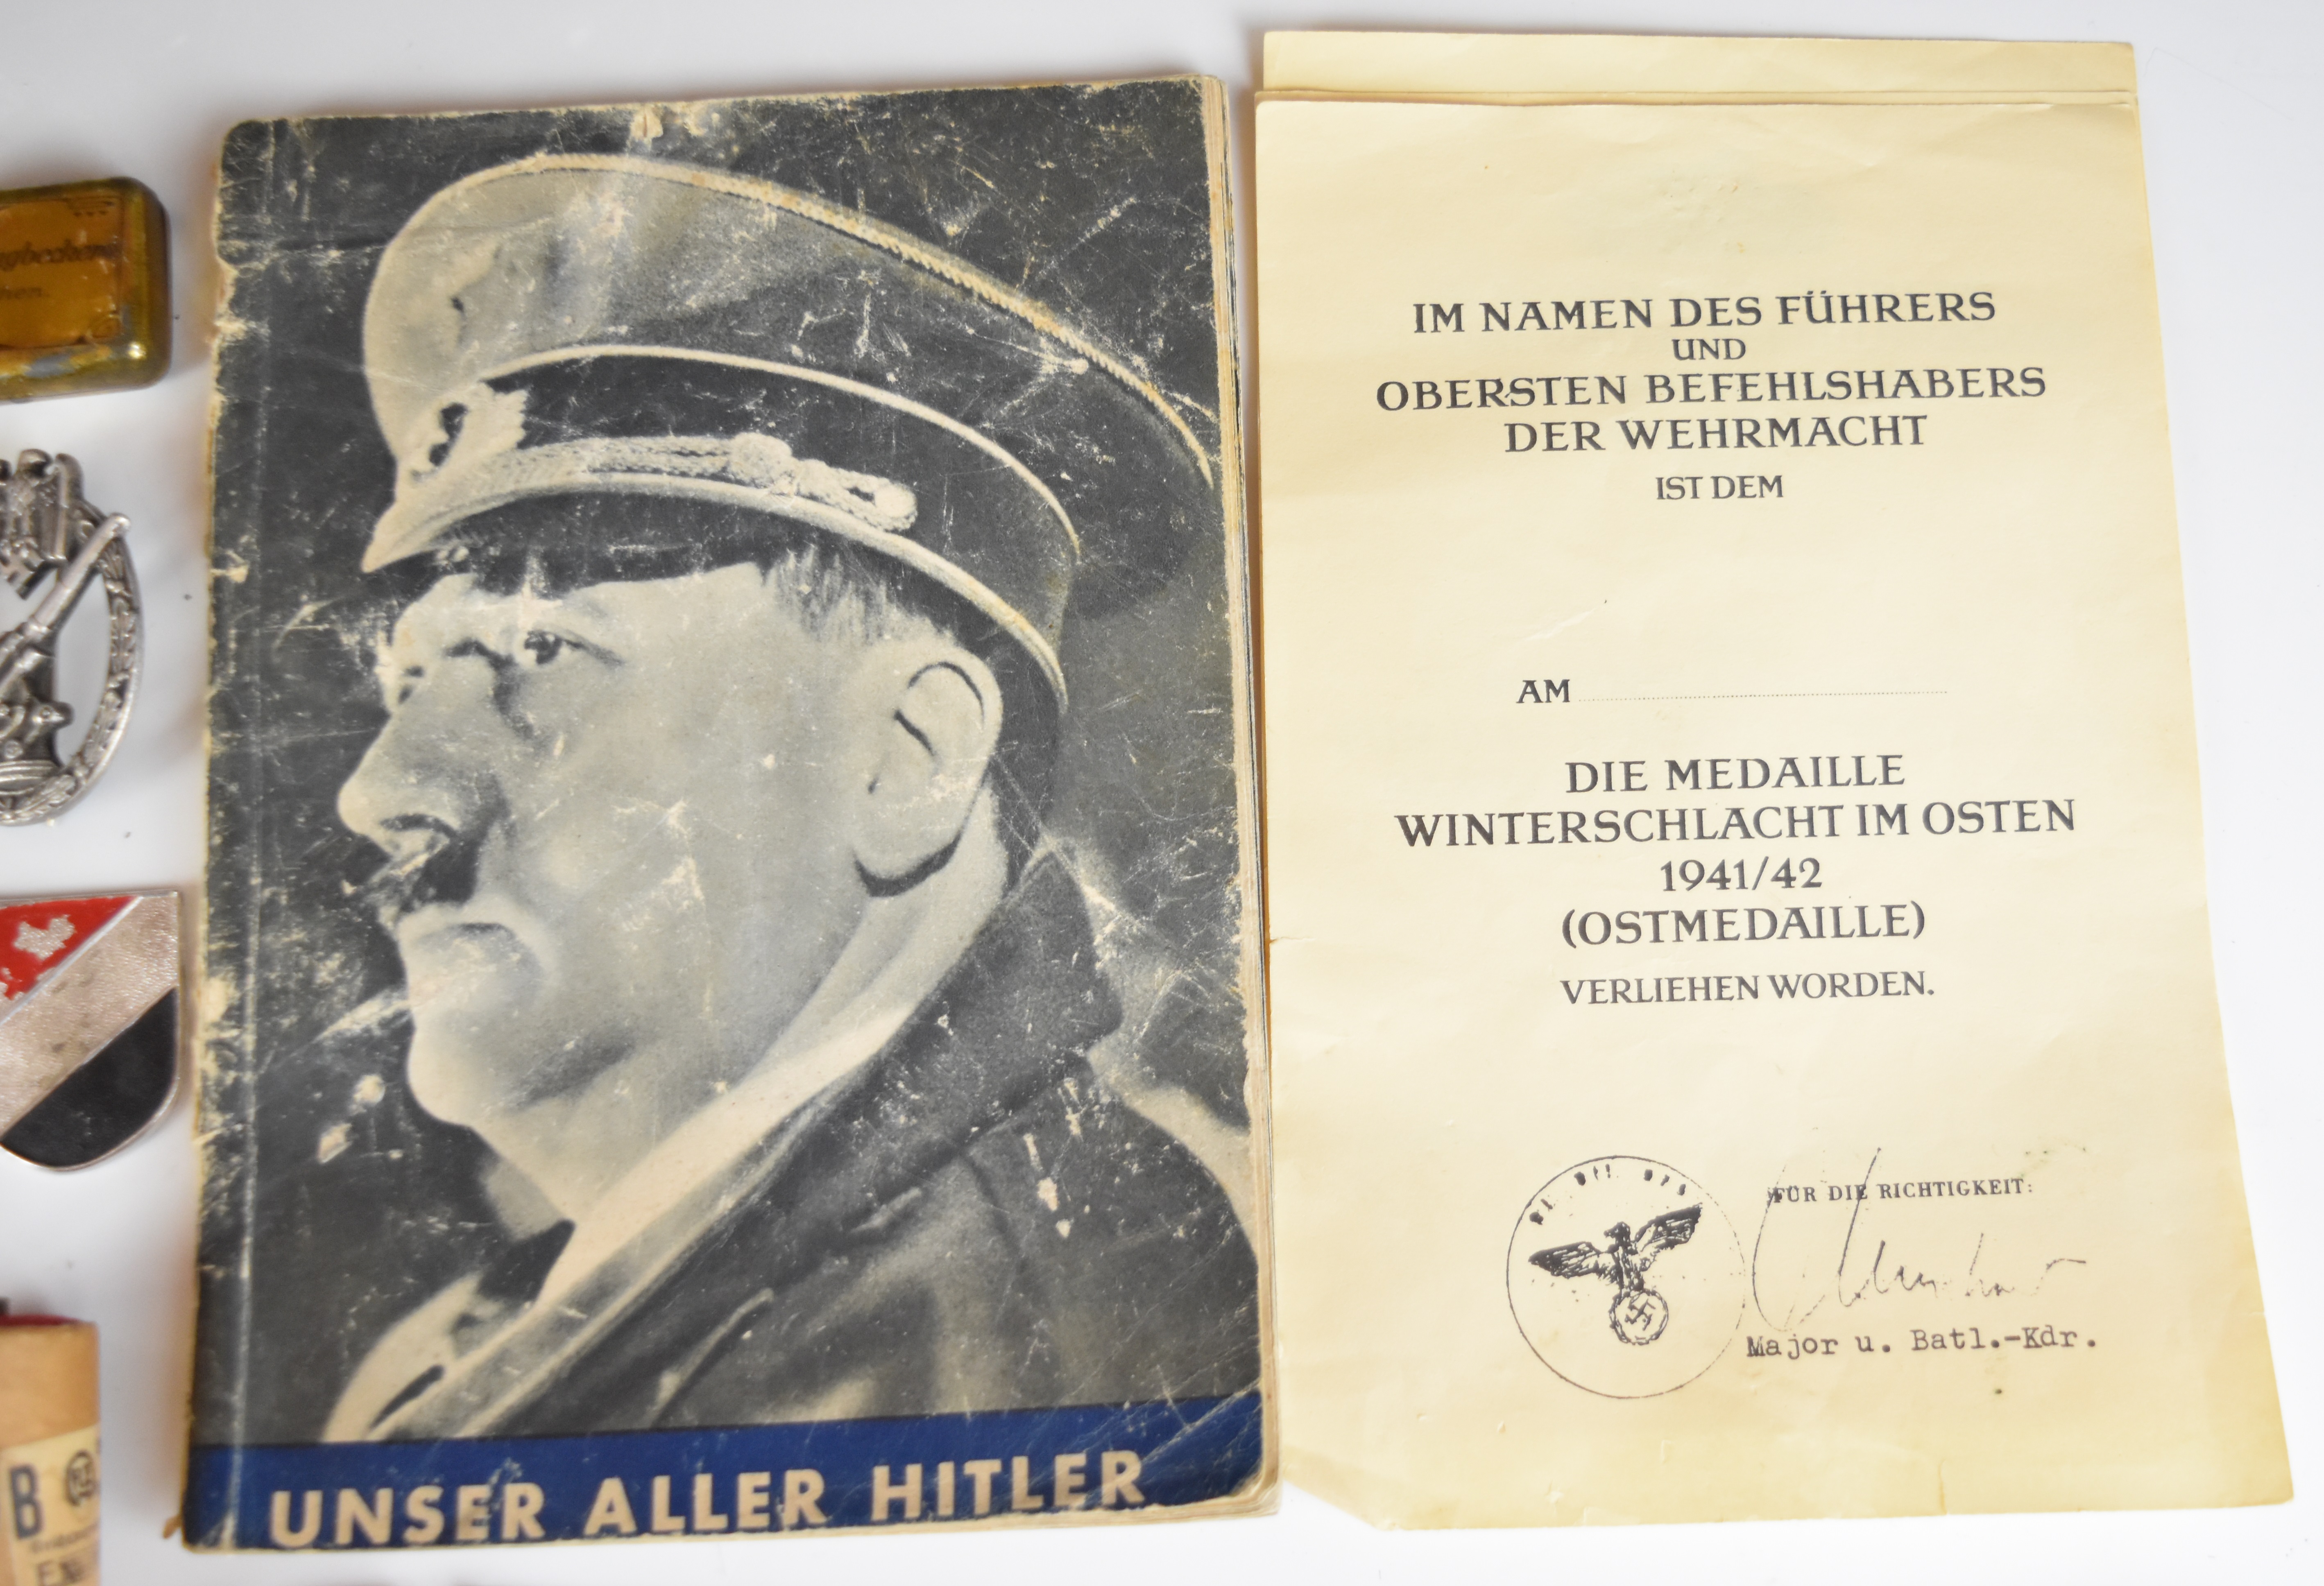 Mainly reproduction German WW2 Nazi insignia, booklets etc - Image 8 of 16